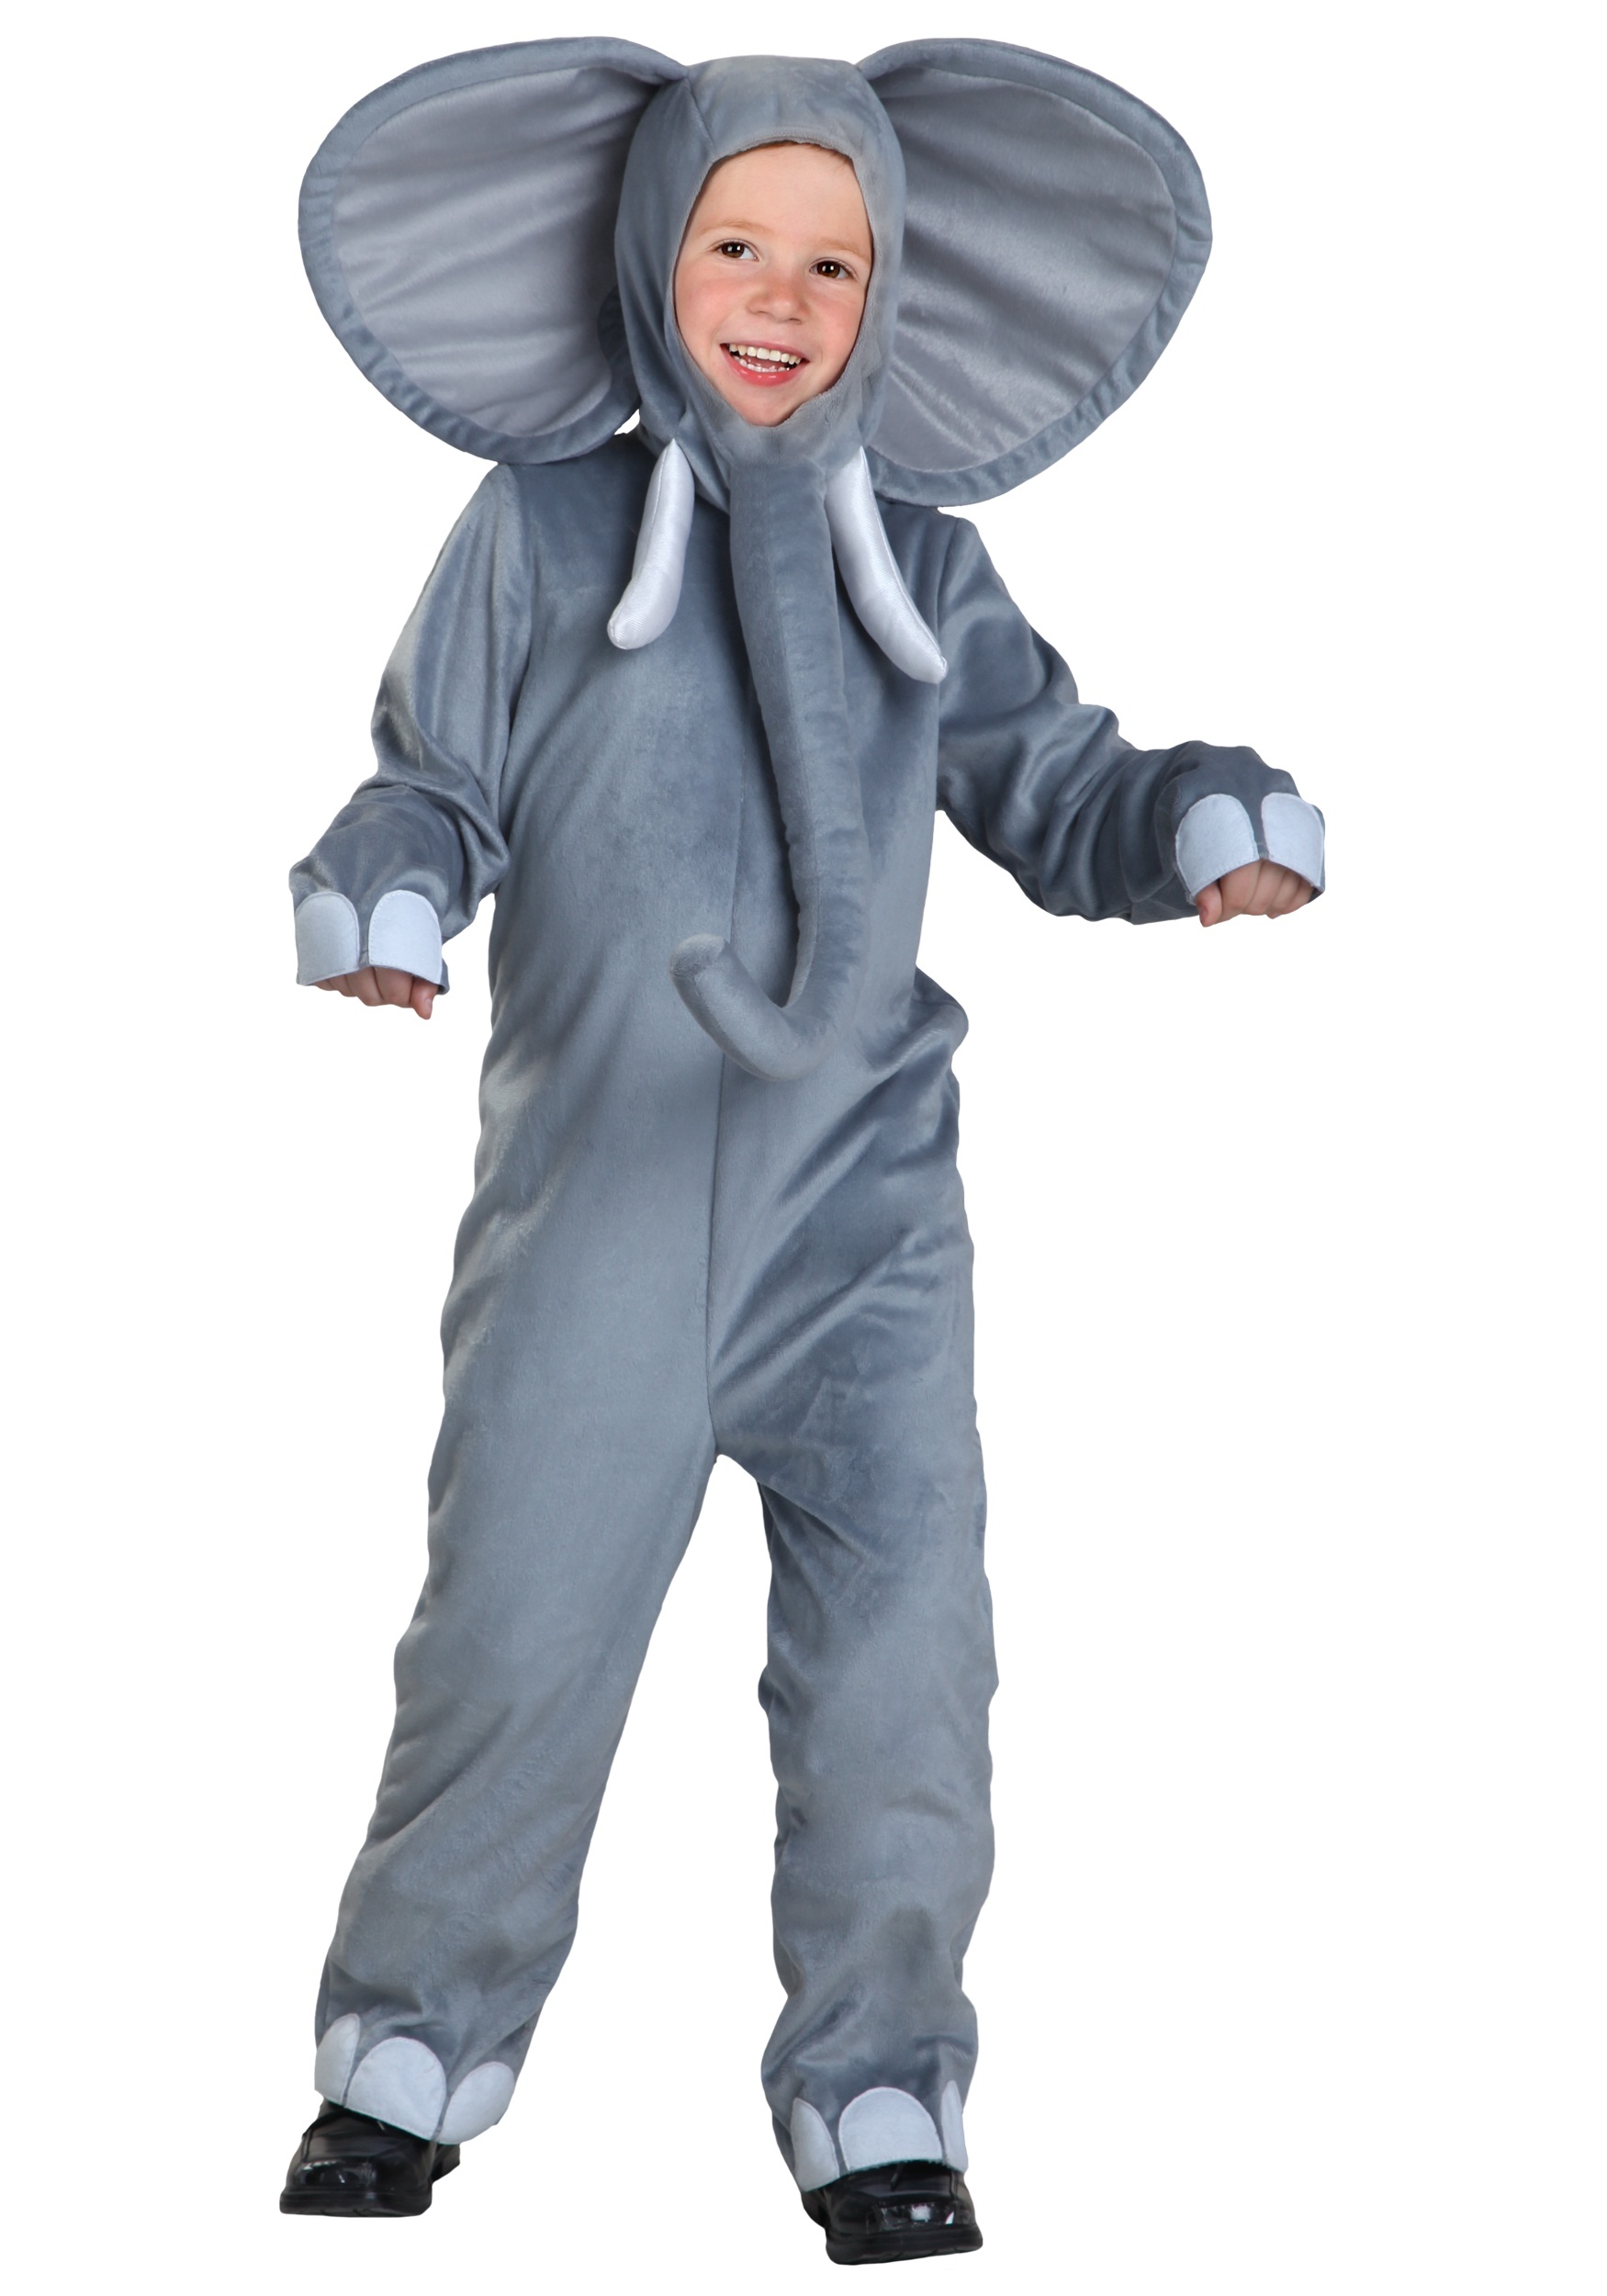 Photos - Fancy Dress Toddler FUN Costumes Elephant Costume for Toddlers Gray FUN1606TD 